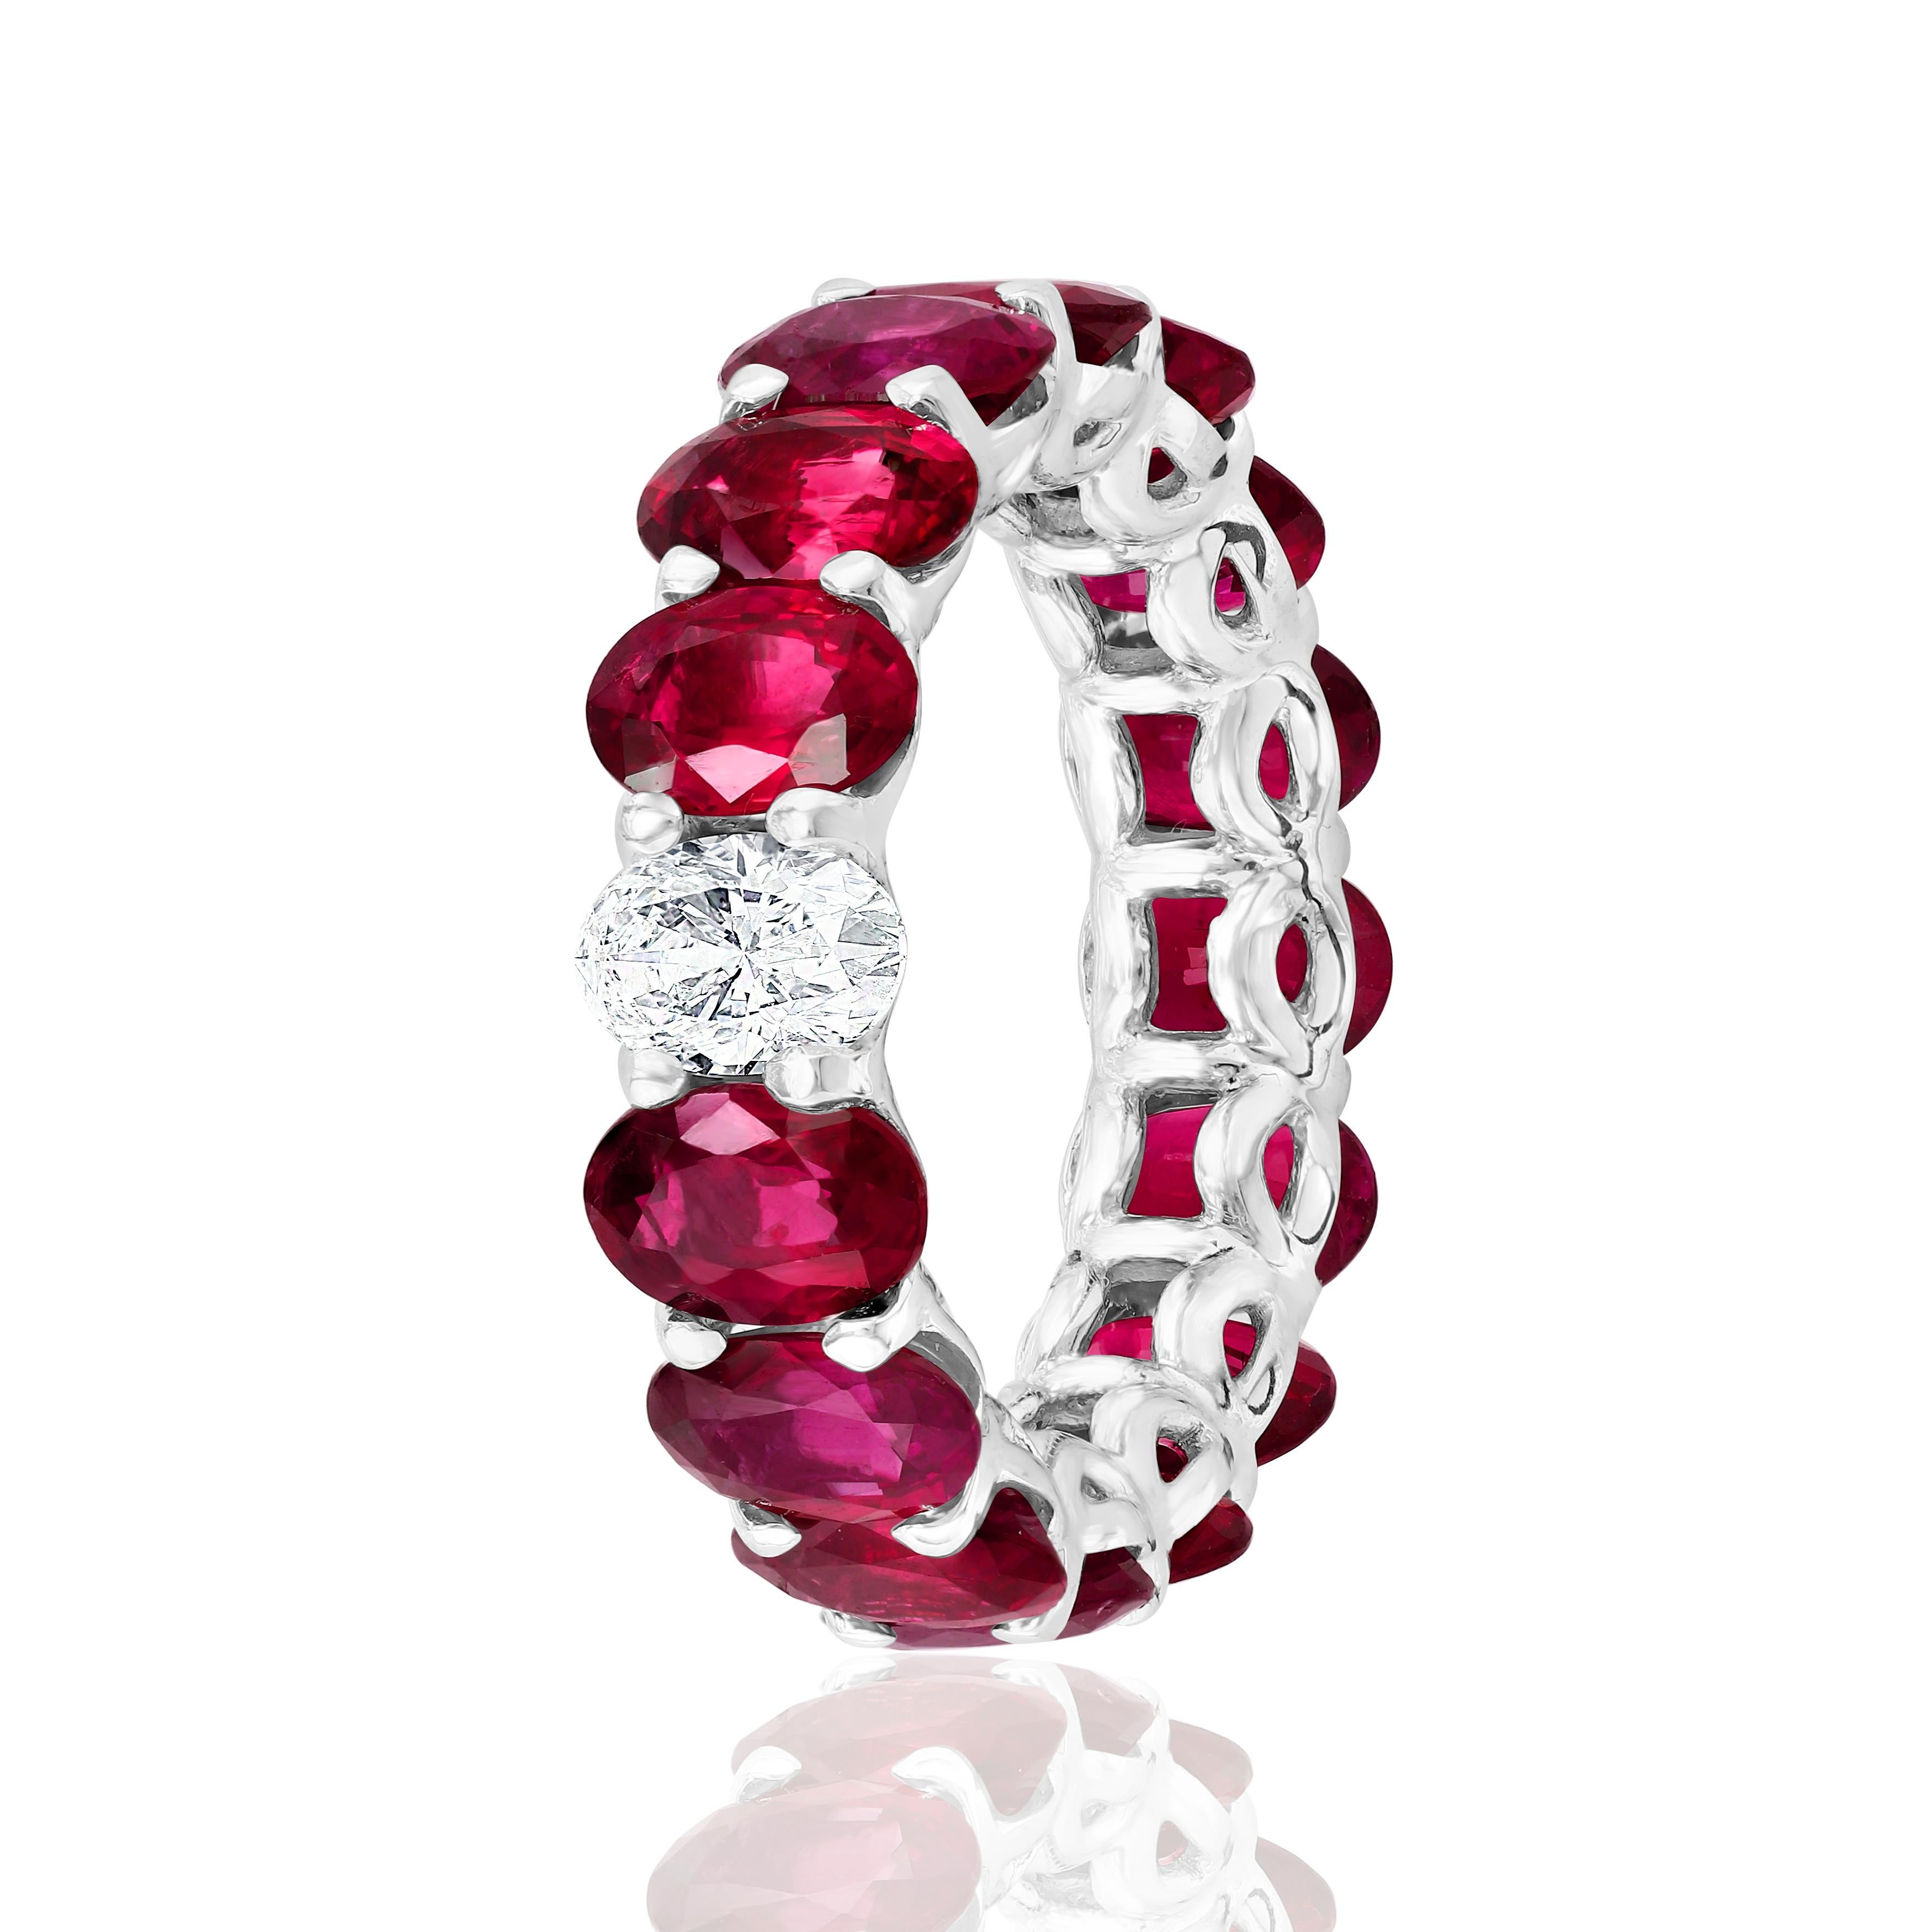 15 Oval Rubies weighing 8.96 Carats.
1 Oval Diamond weighing 0.47 Carats.

Set in Platinum.

Also available in Emeralds and Sapphires